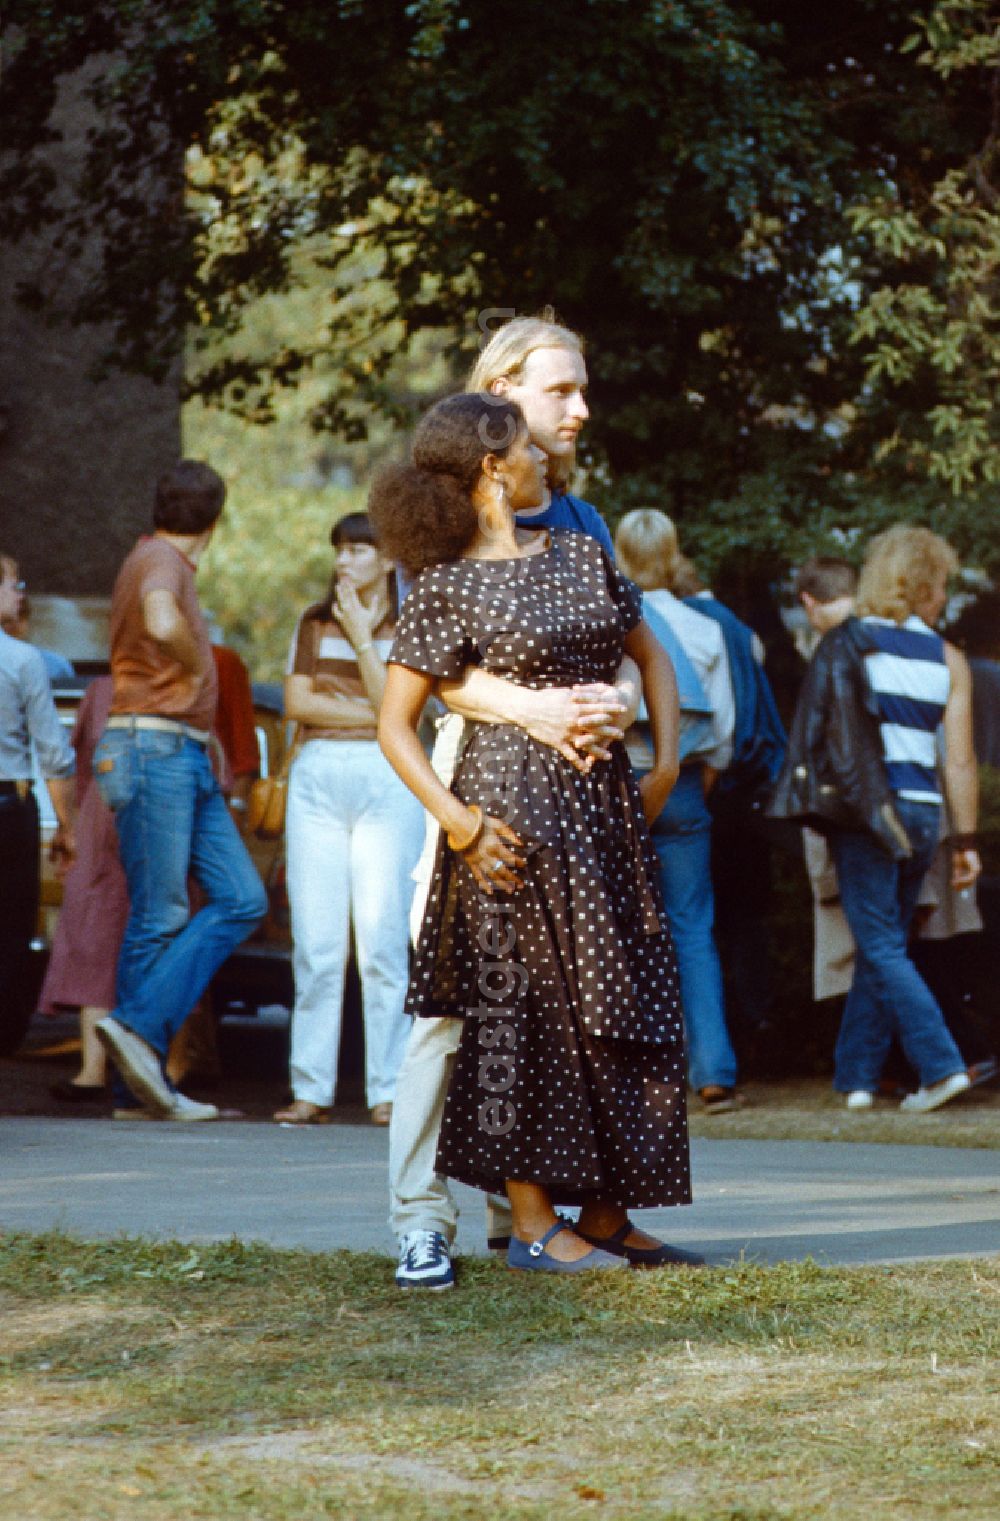 GDR picture archive: Berlin - Couple at the Pankefest in Berlin on the territory of the former GDR, German Democratic Republic